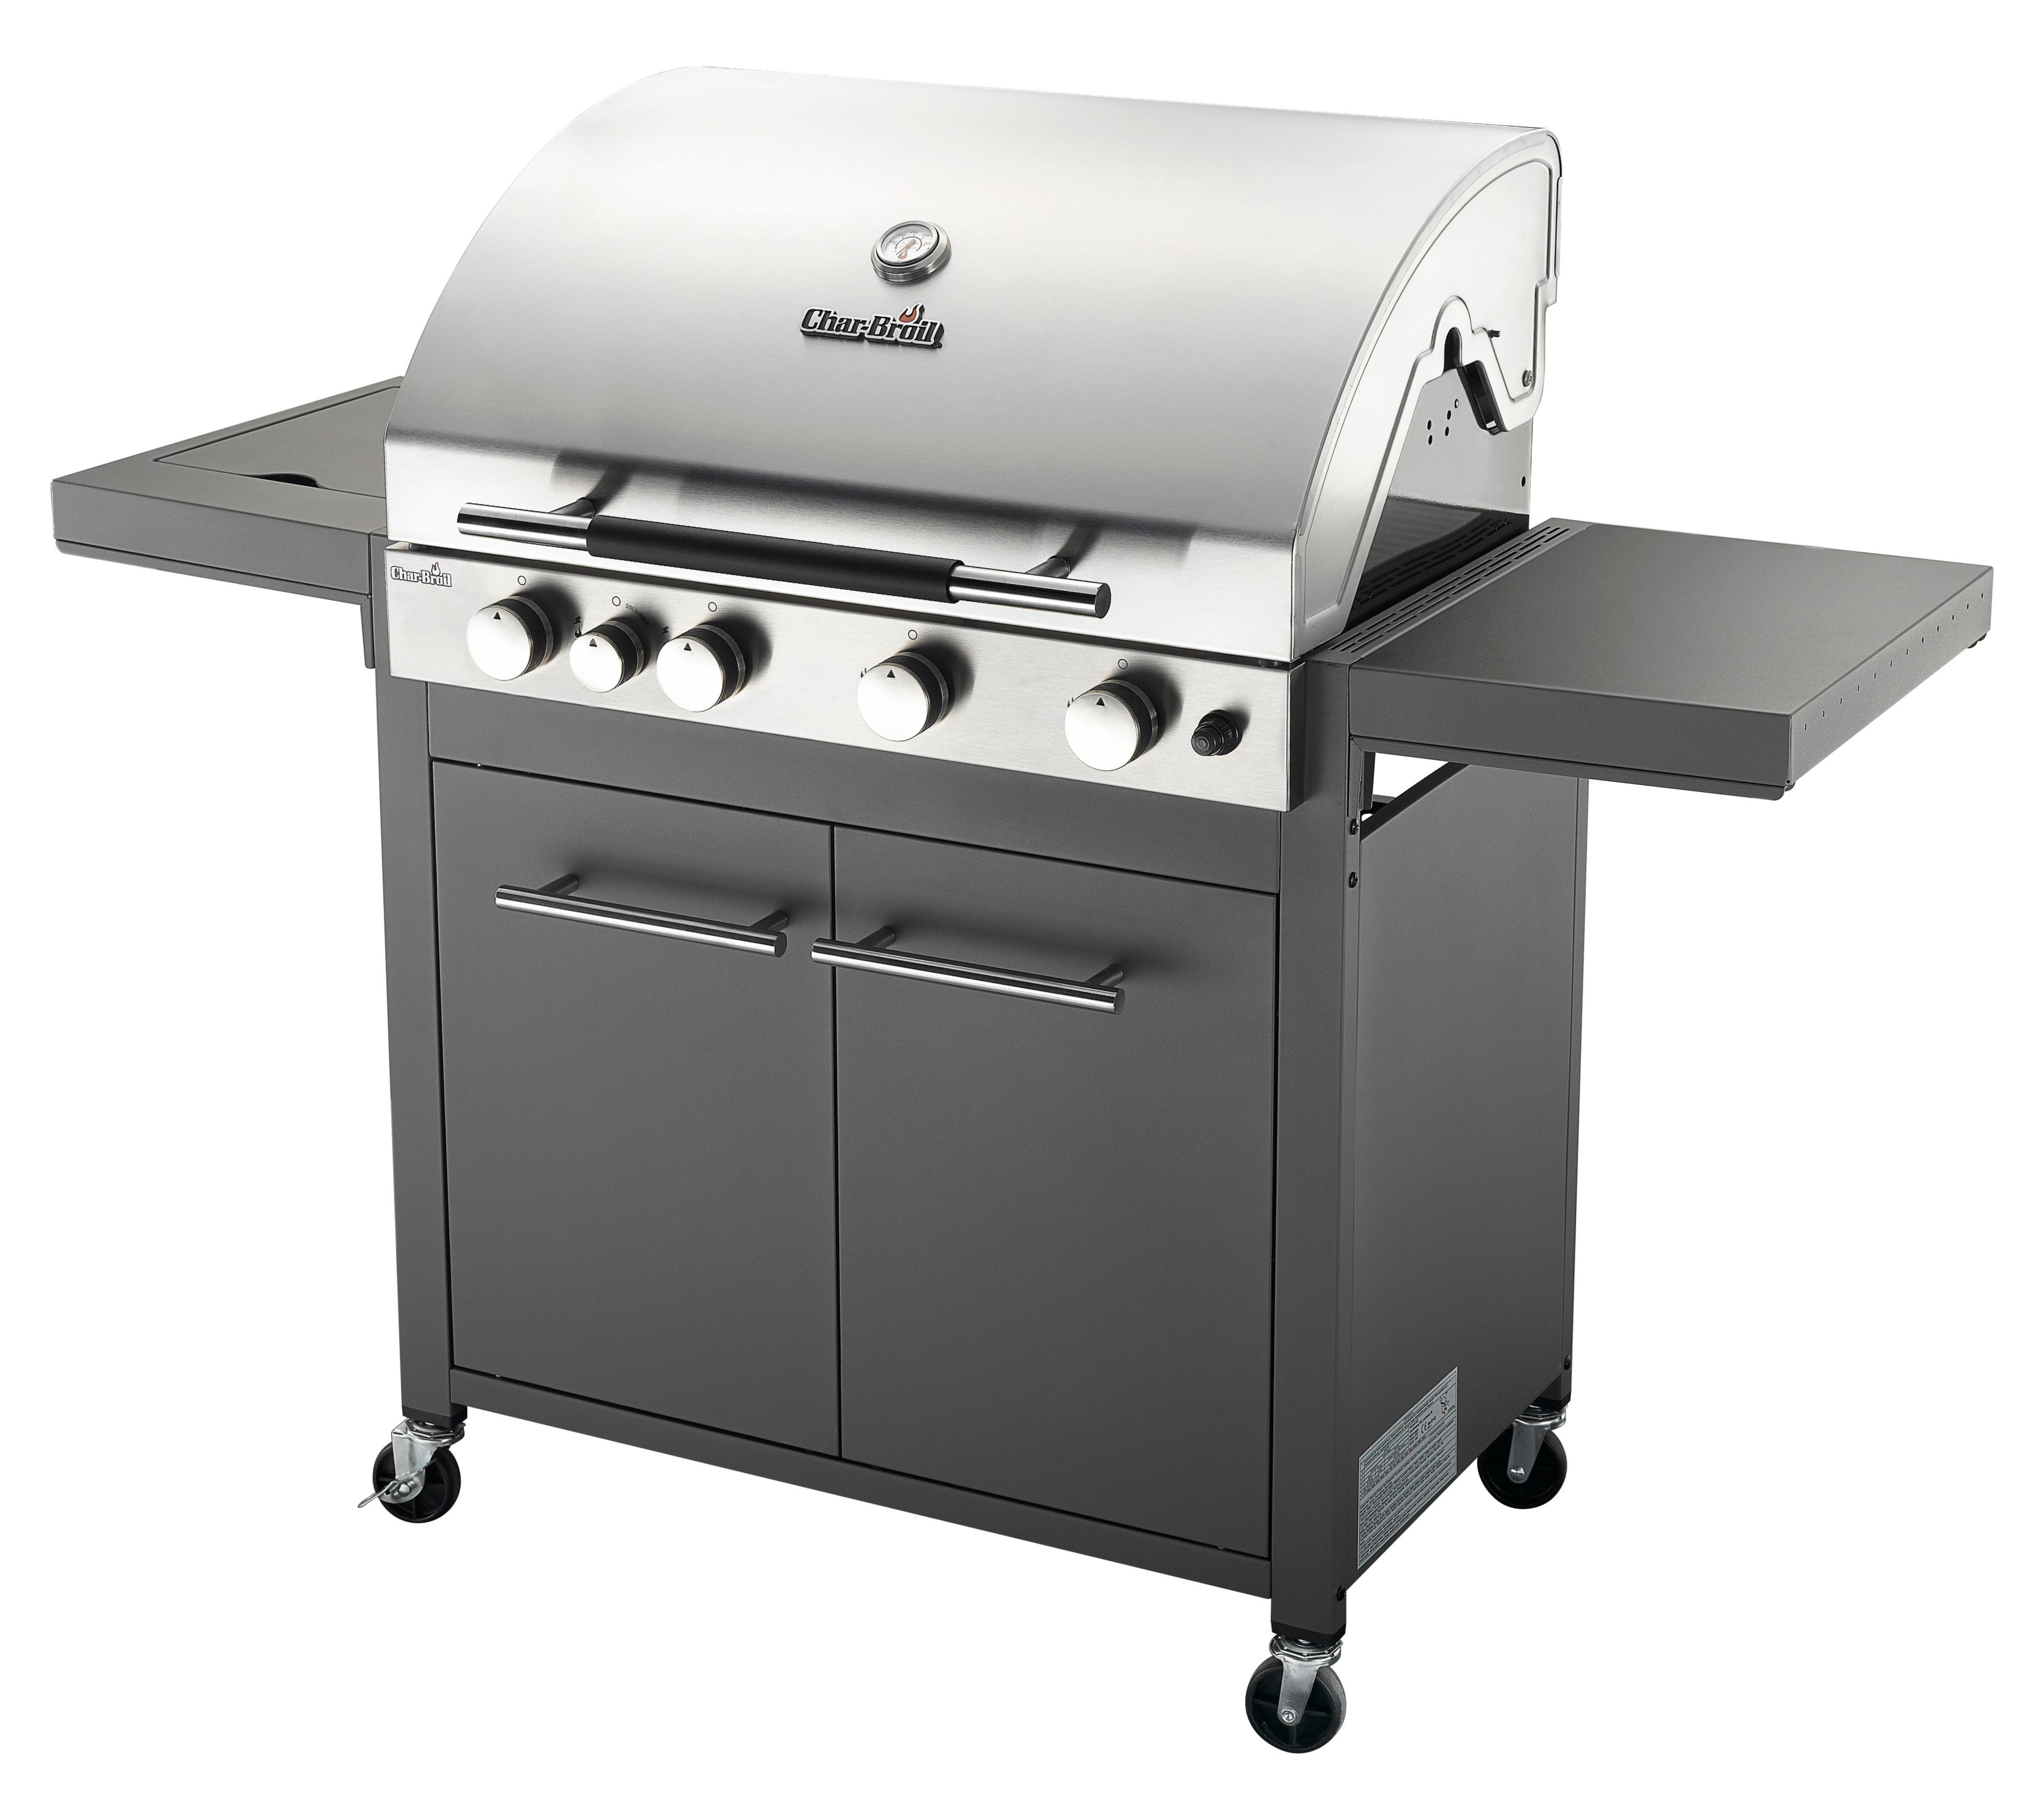 Charbroil C-46G Convective 4 Gas Barbecue